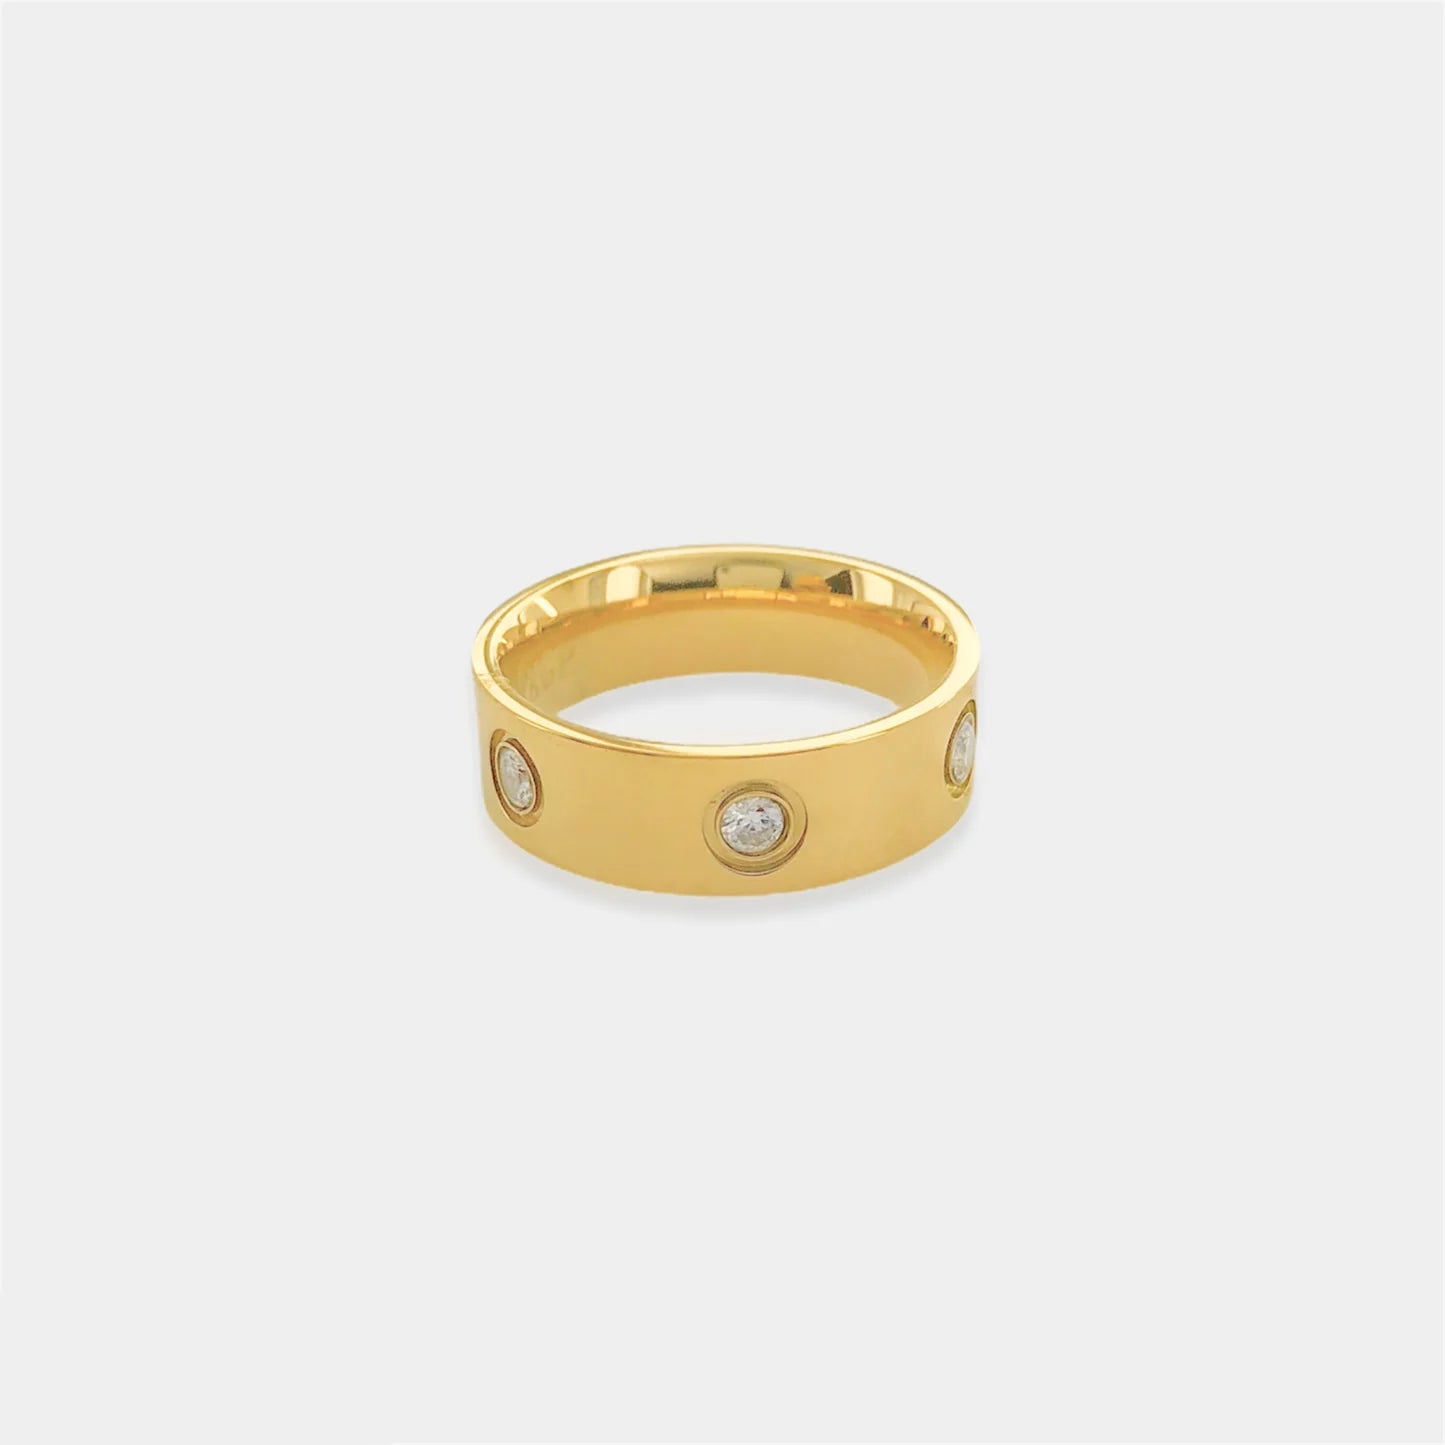 Gold Thick Stainless Steel Ring Size 7